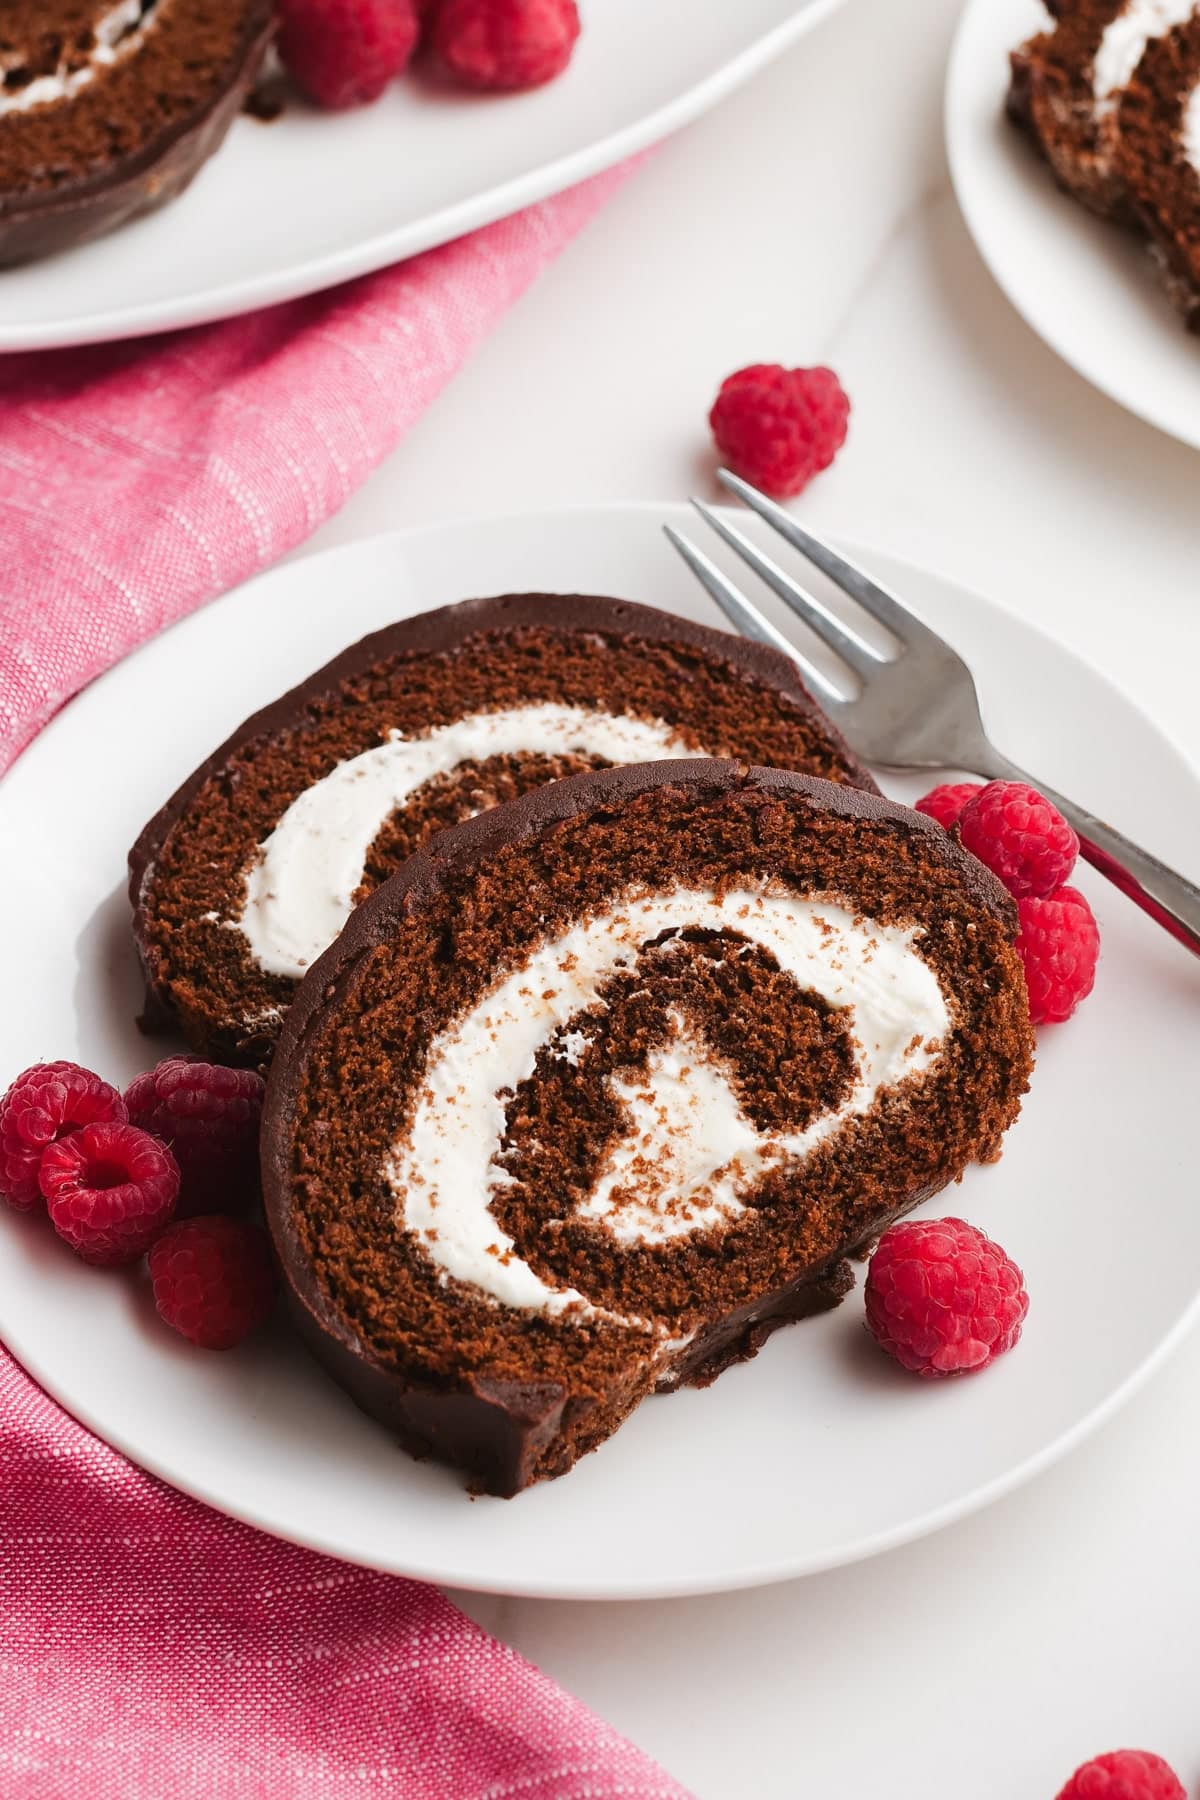 chocolate swiss roll slices on a plate with raspberries and a fork